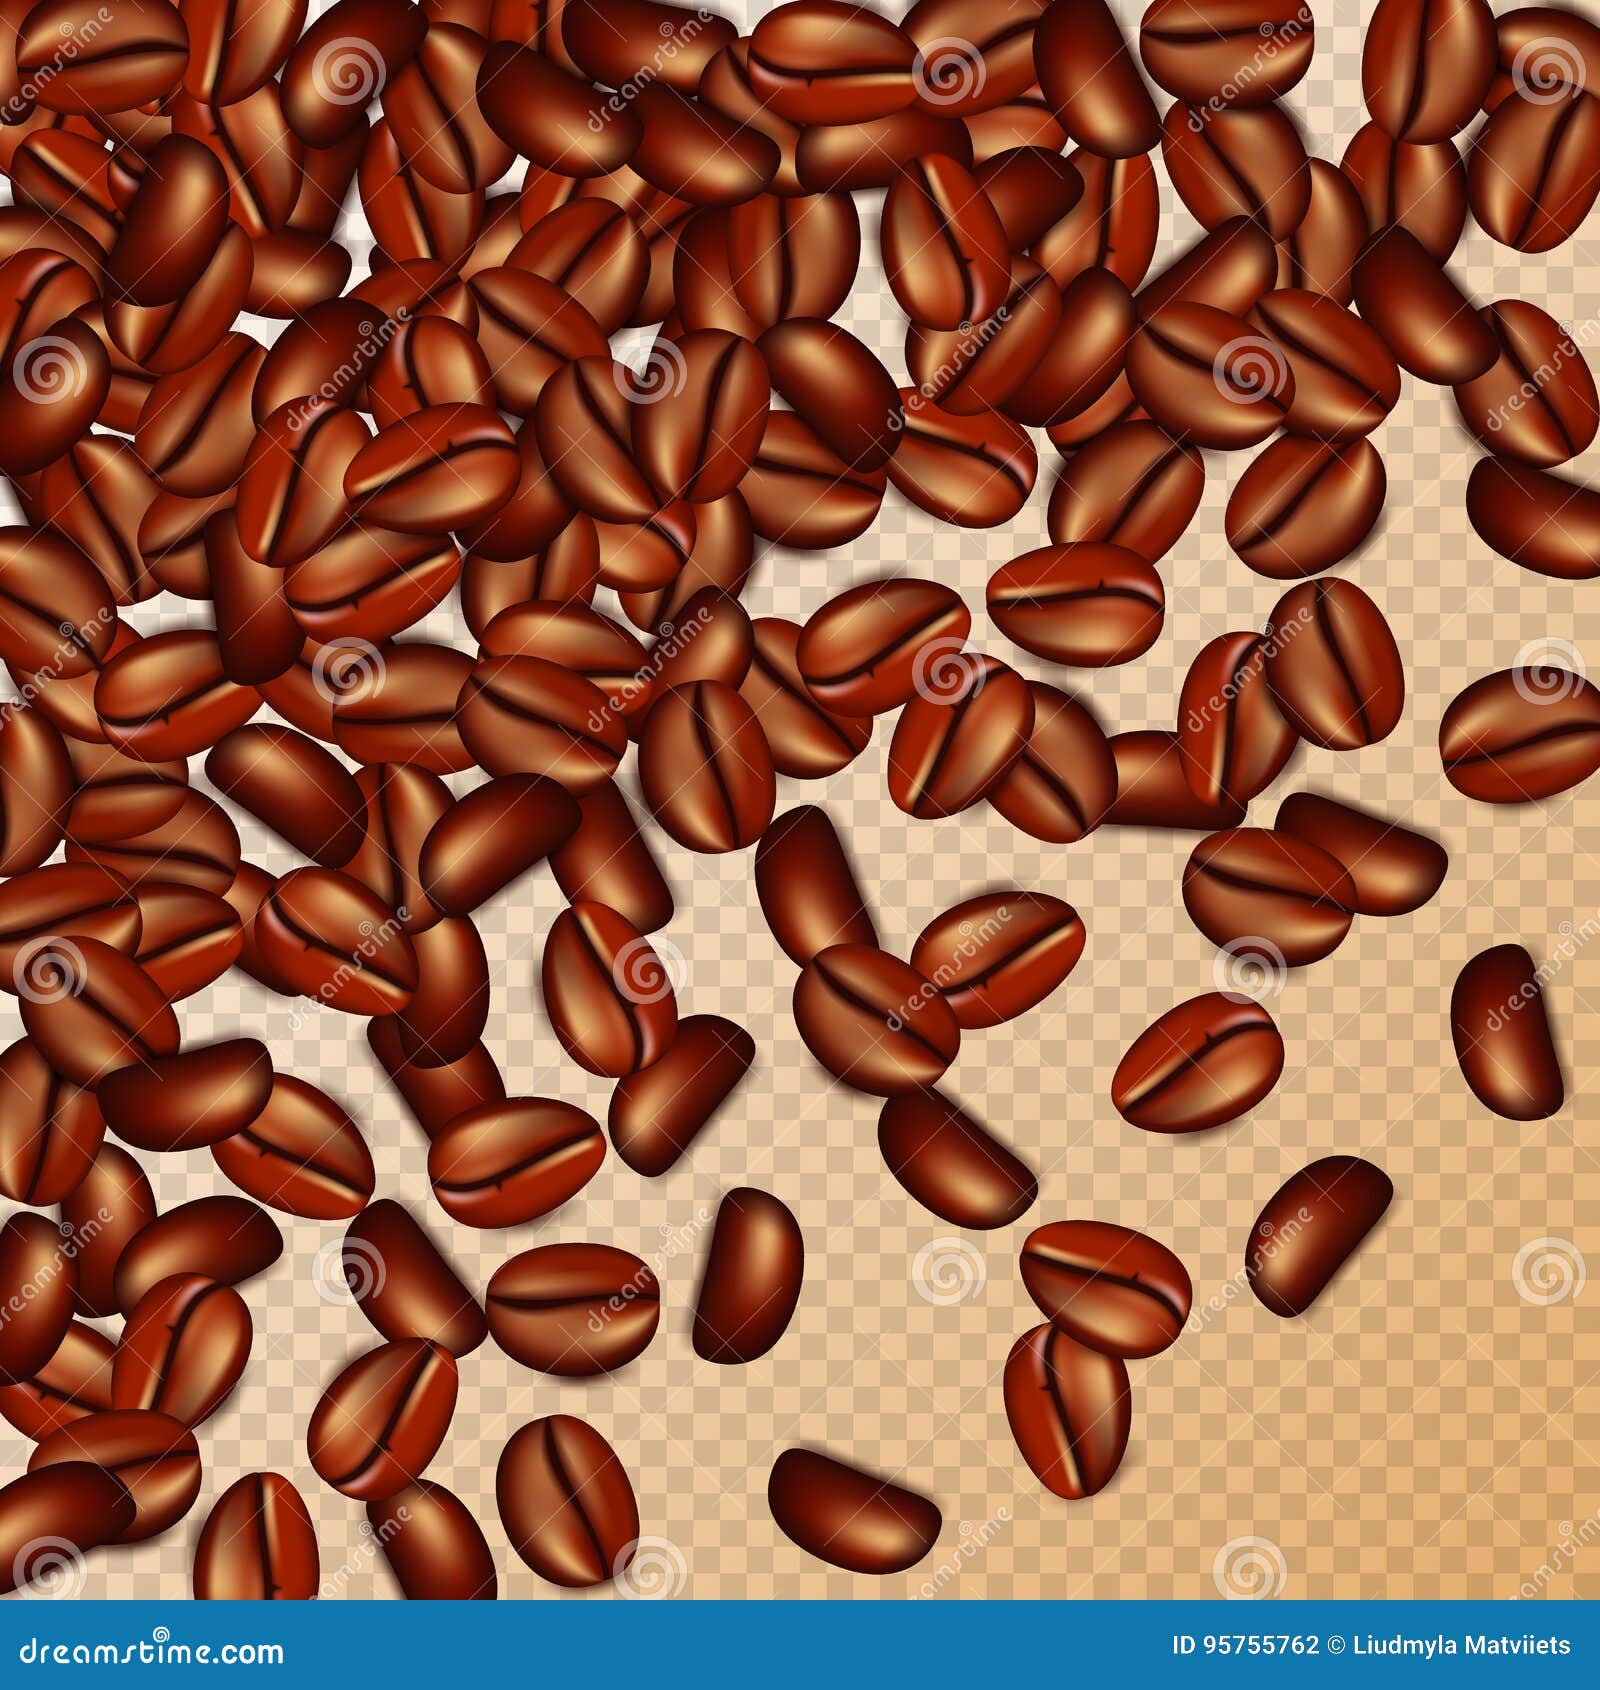 Realistic 3d coffee beans on transparent background. Vector illustration.